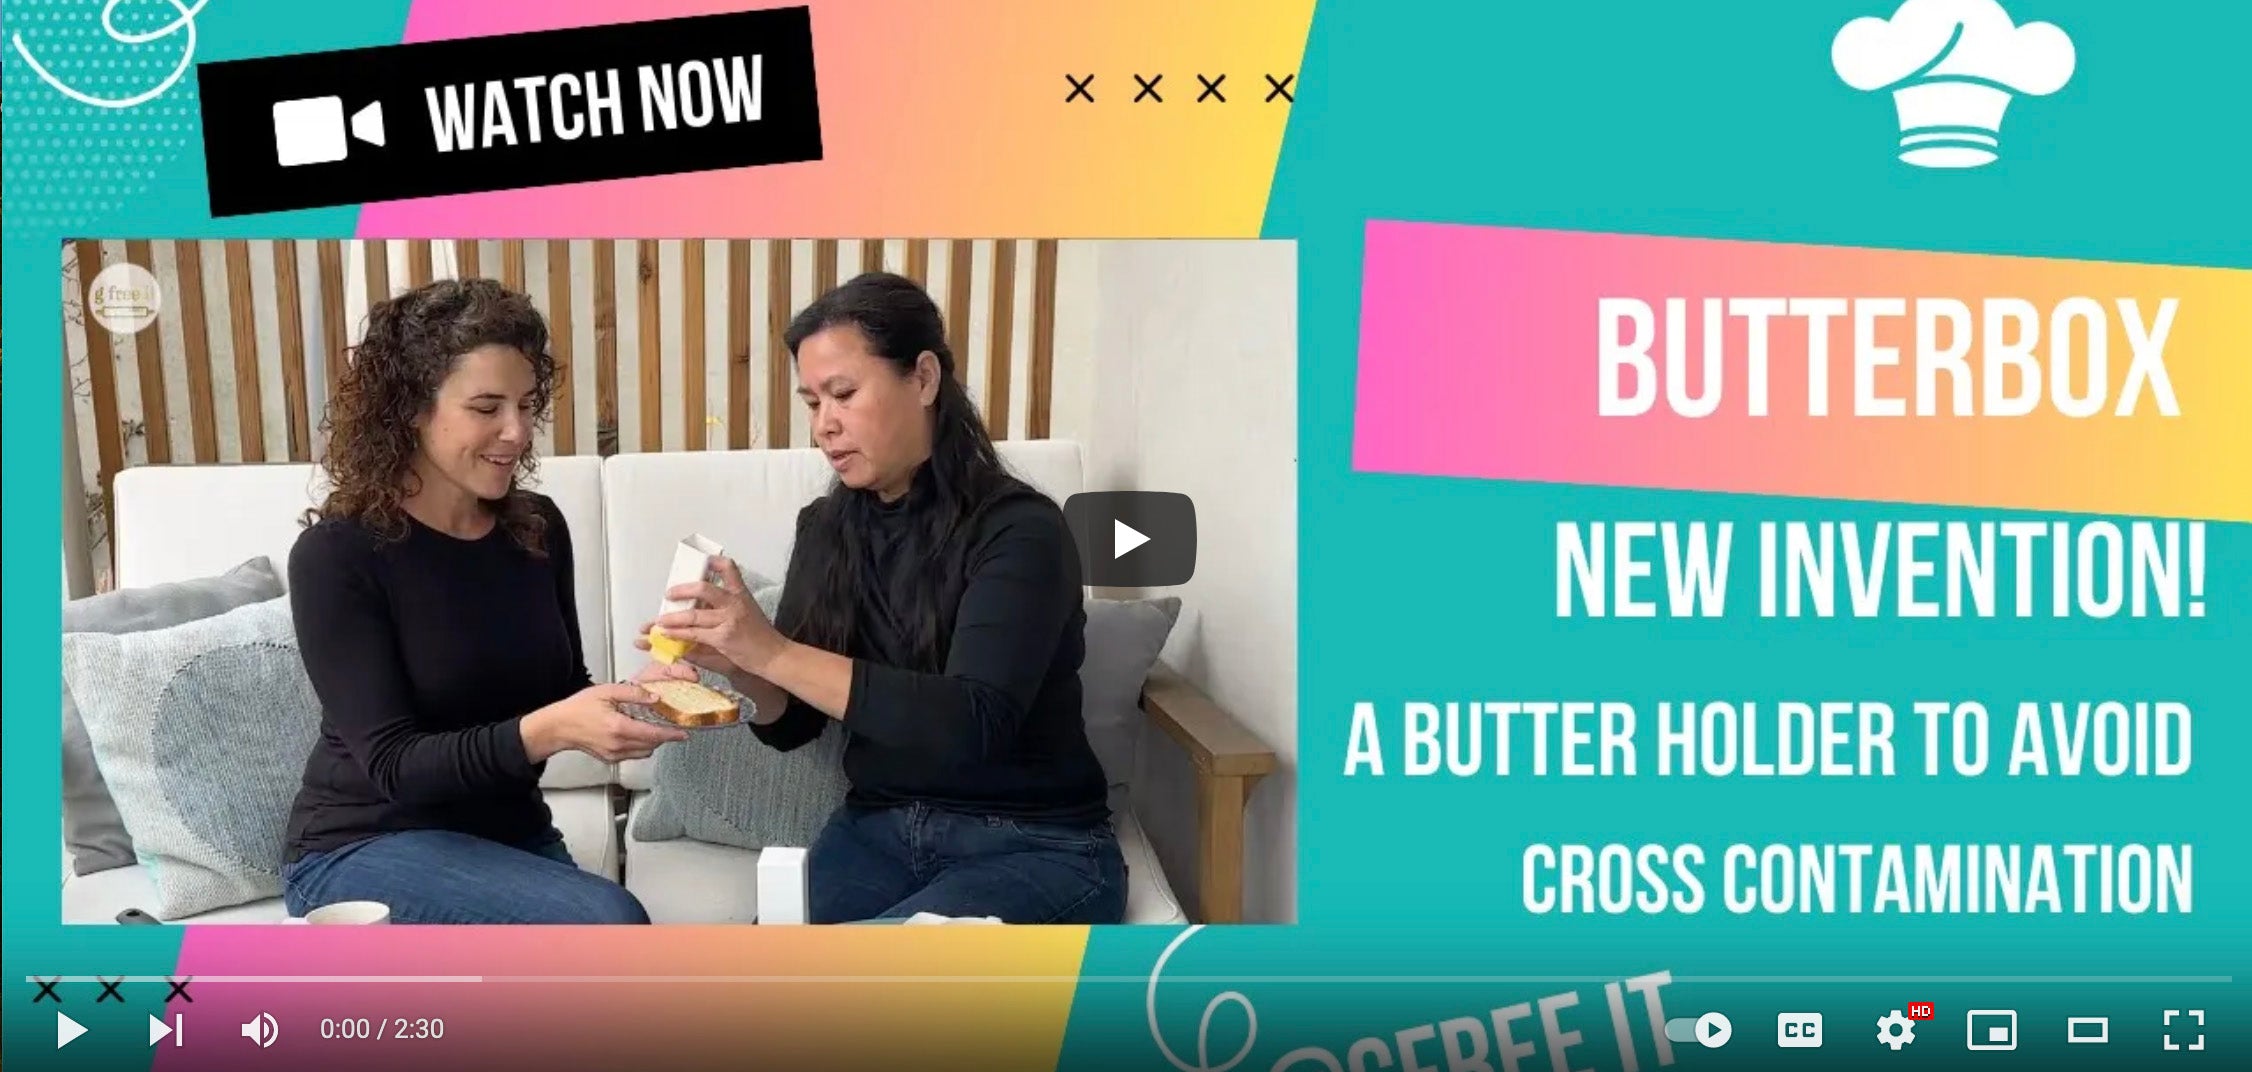 Load video: 0:00 / 2:30 Butterbox &amp; gfree it team up! This invention may solve your butter cross contamination!